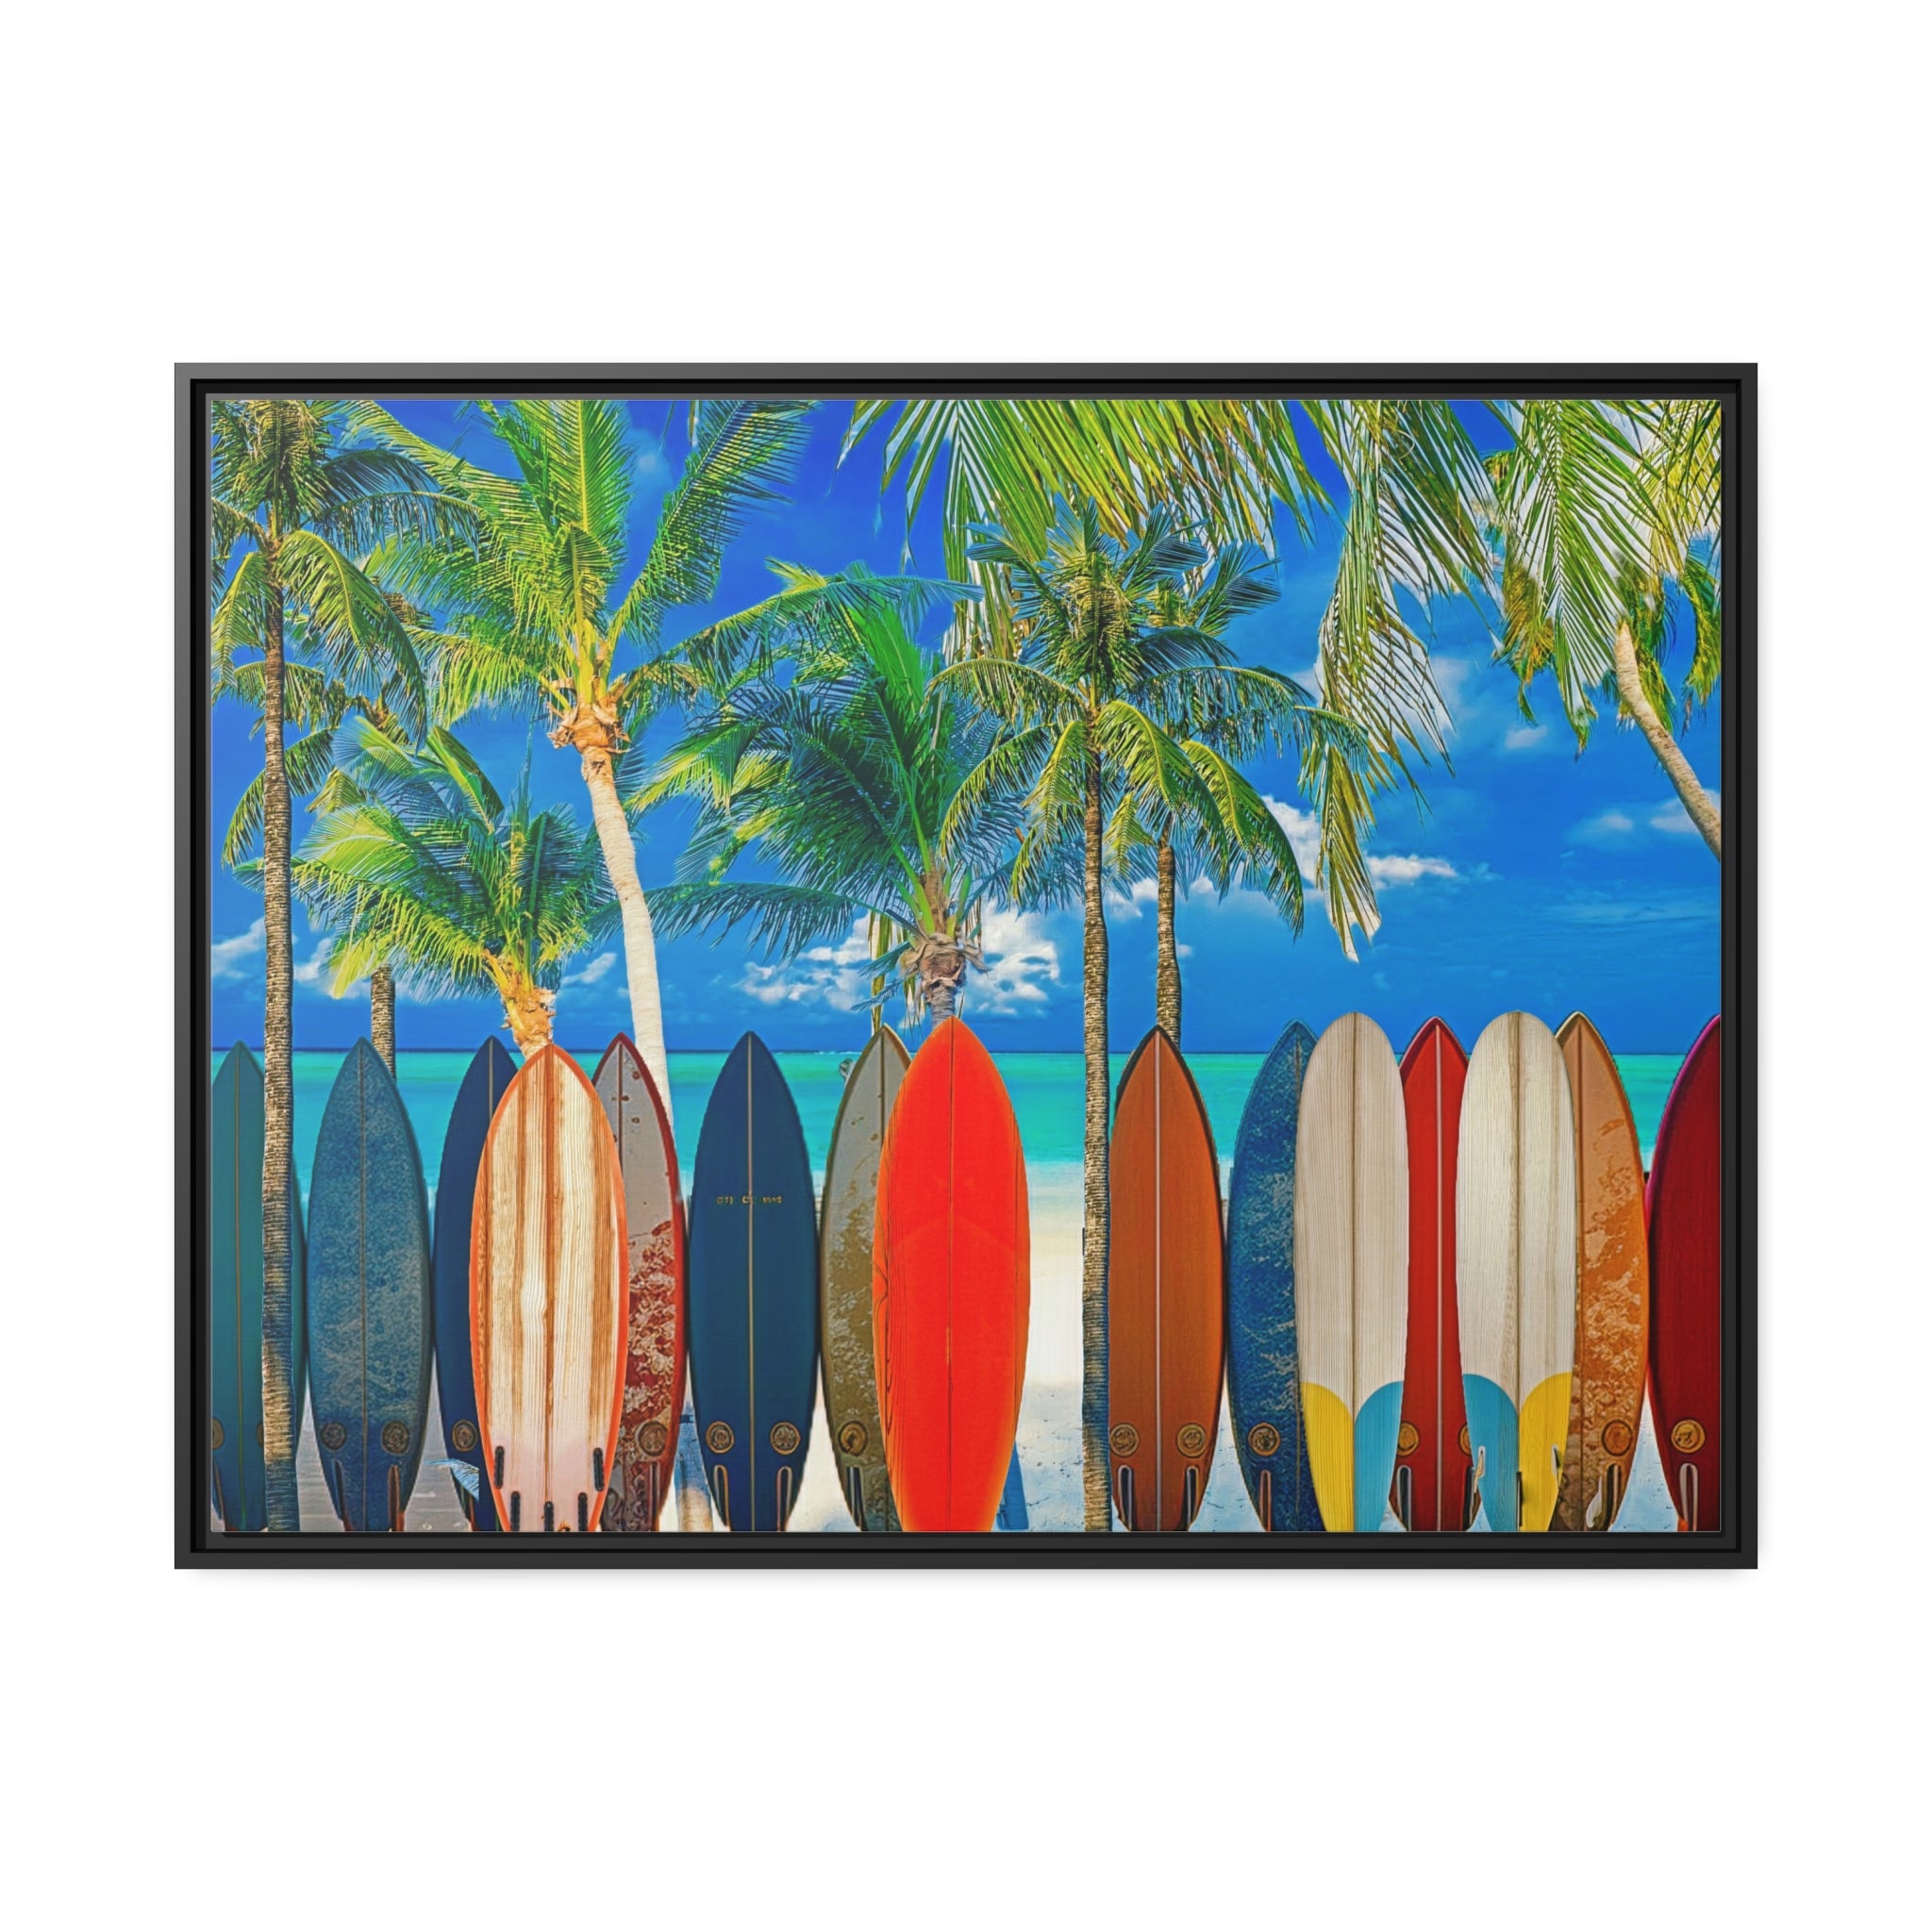 Wall Art PALM BEACH SURFING Painting Original Giclee Print Canvas Nice Blue Ocean Water Sand Beauty Sunny Day Fun Design Fit Hot House Home Living Gift Ready to Hang